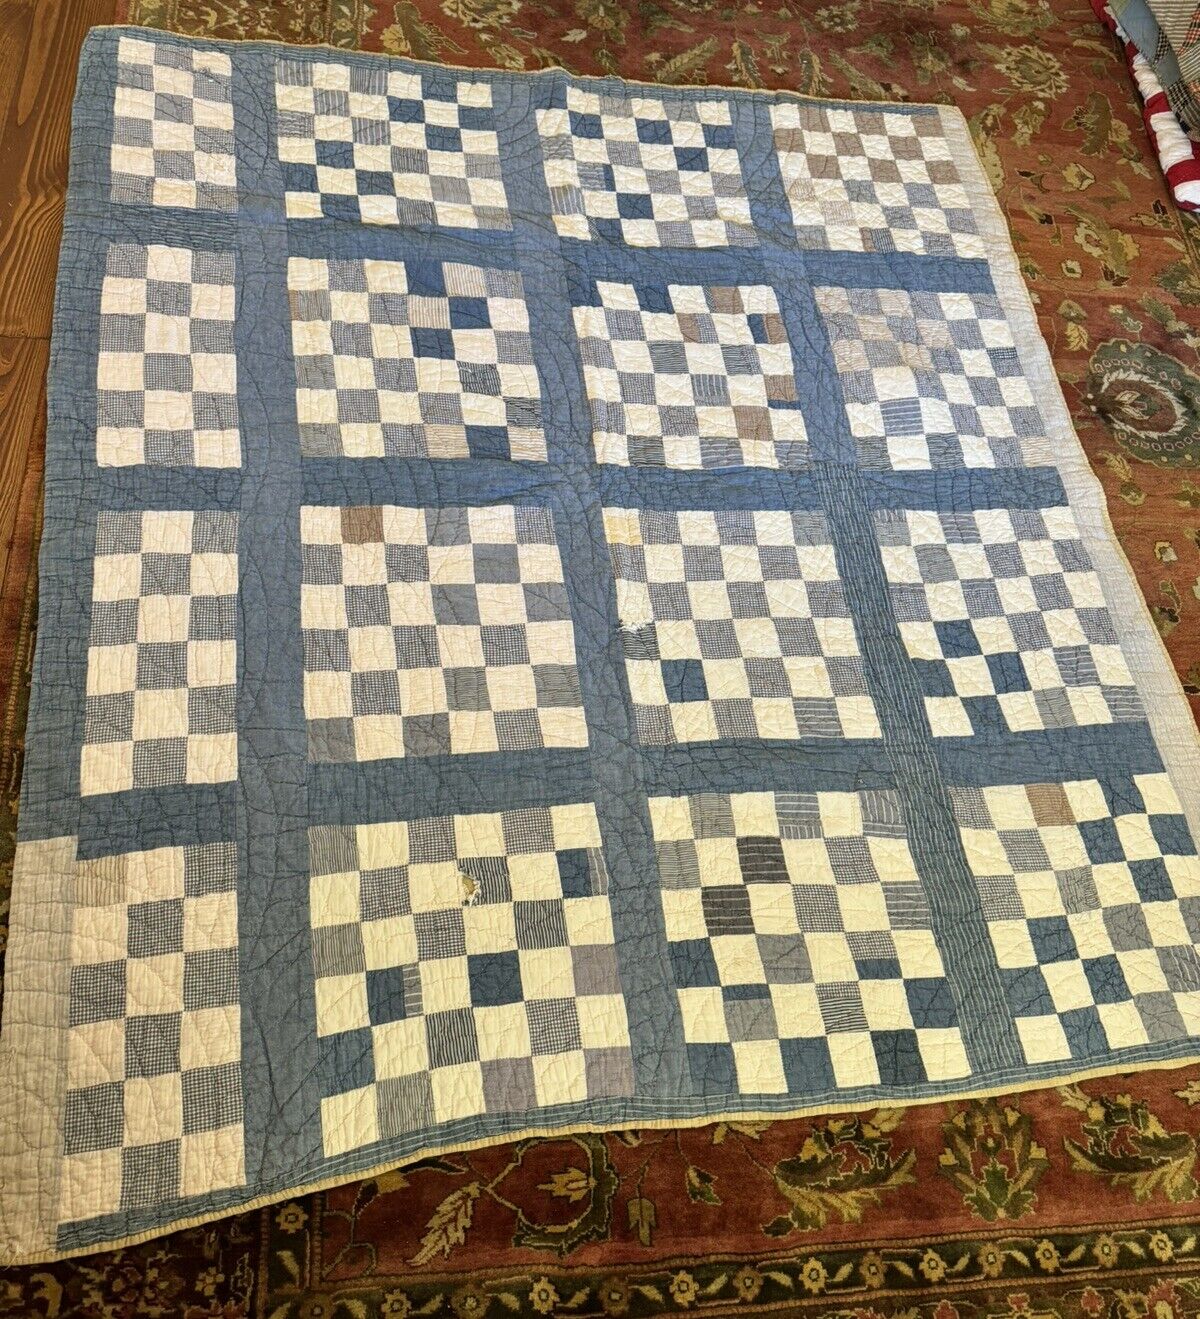 Very Old/Primitive Hand stitched 66” X 70” Blue And White Checked Quilt